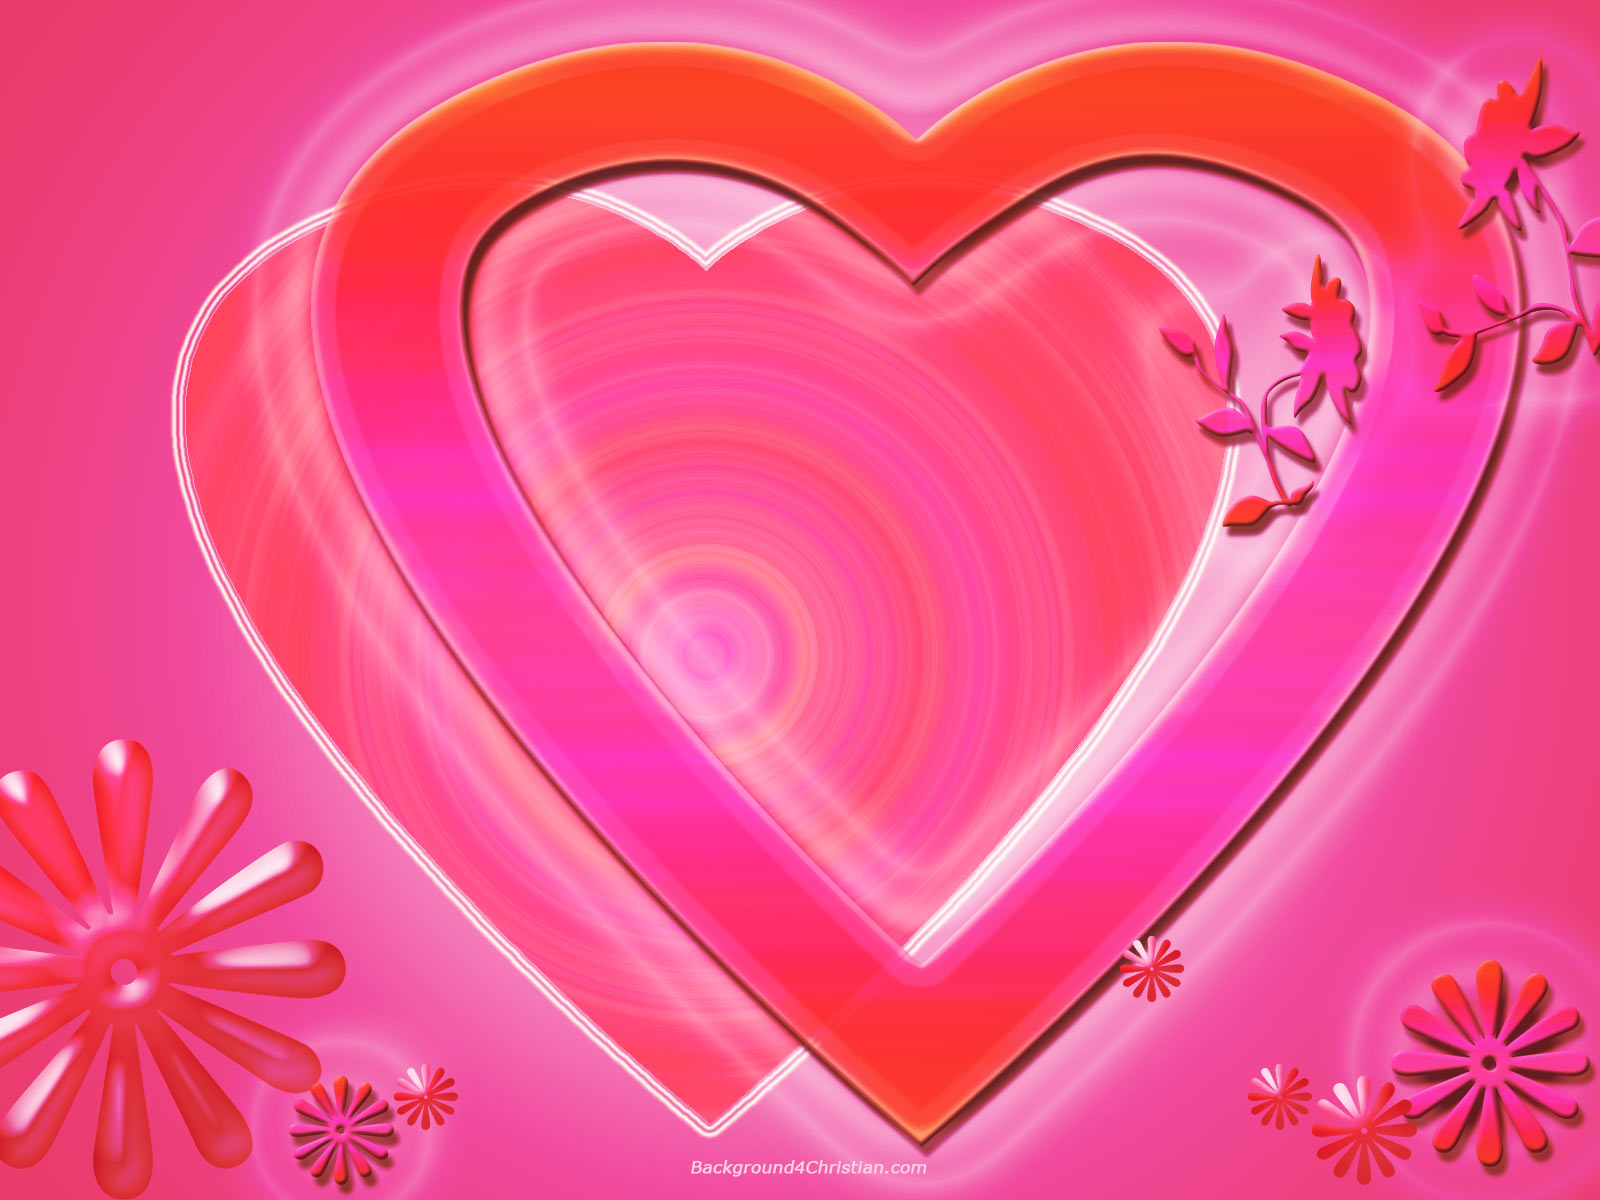 Pink Love Hearts Backgrounds